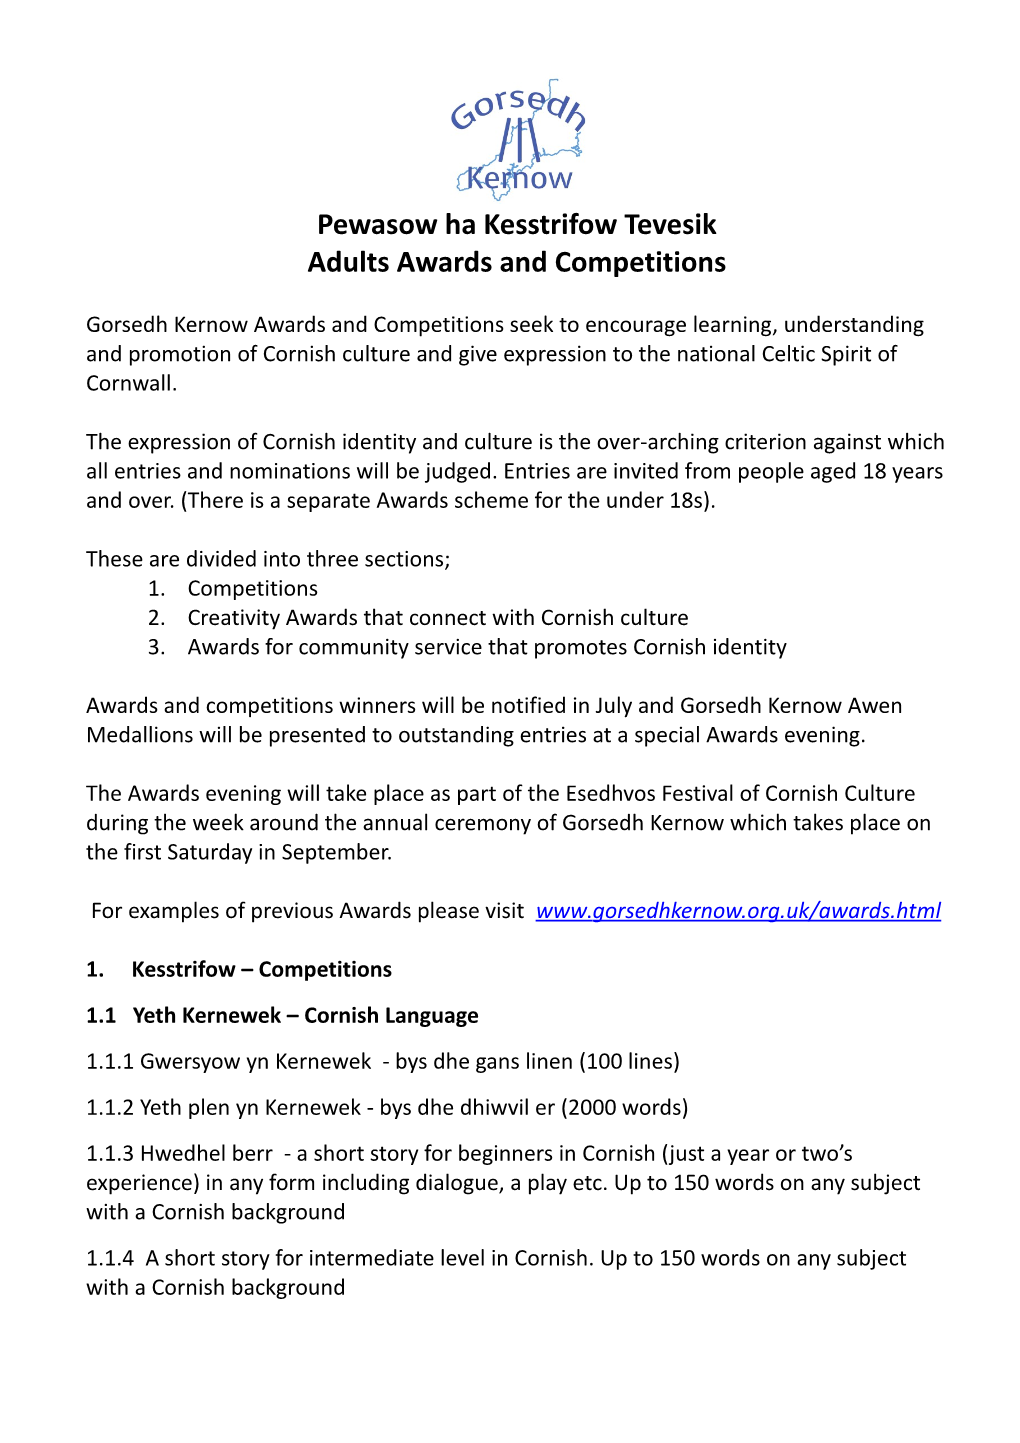 Adults Awards and Competitions